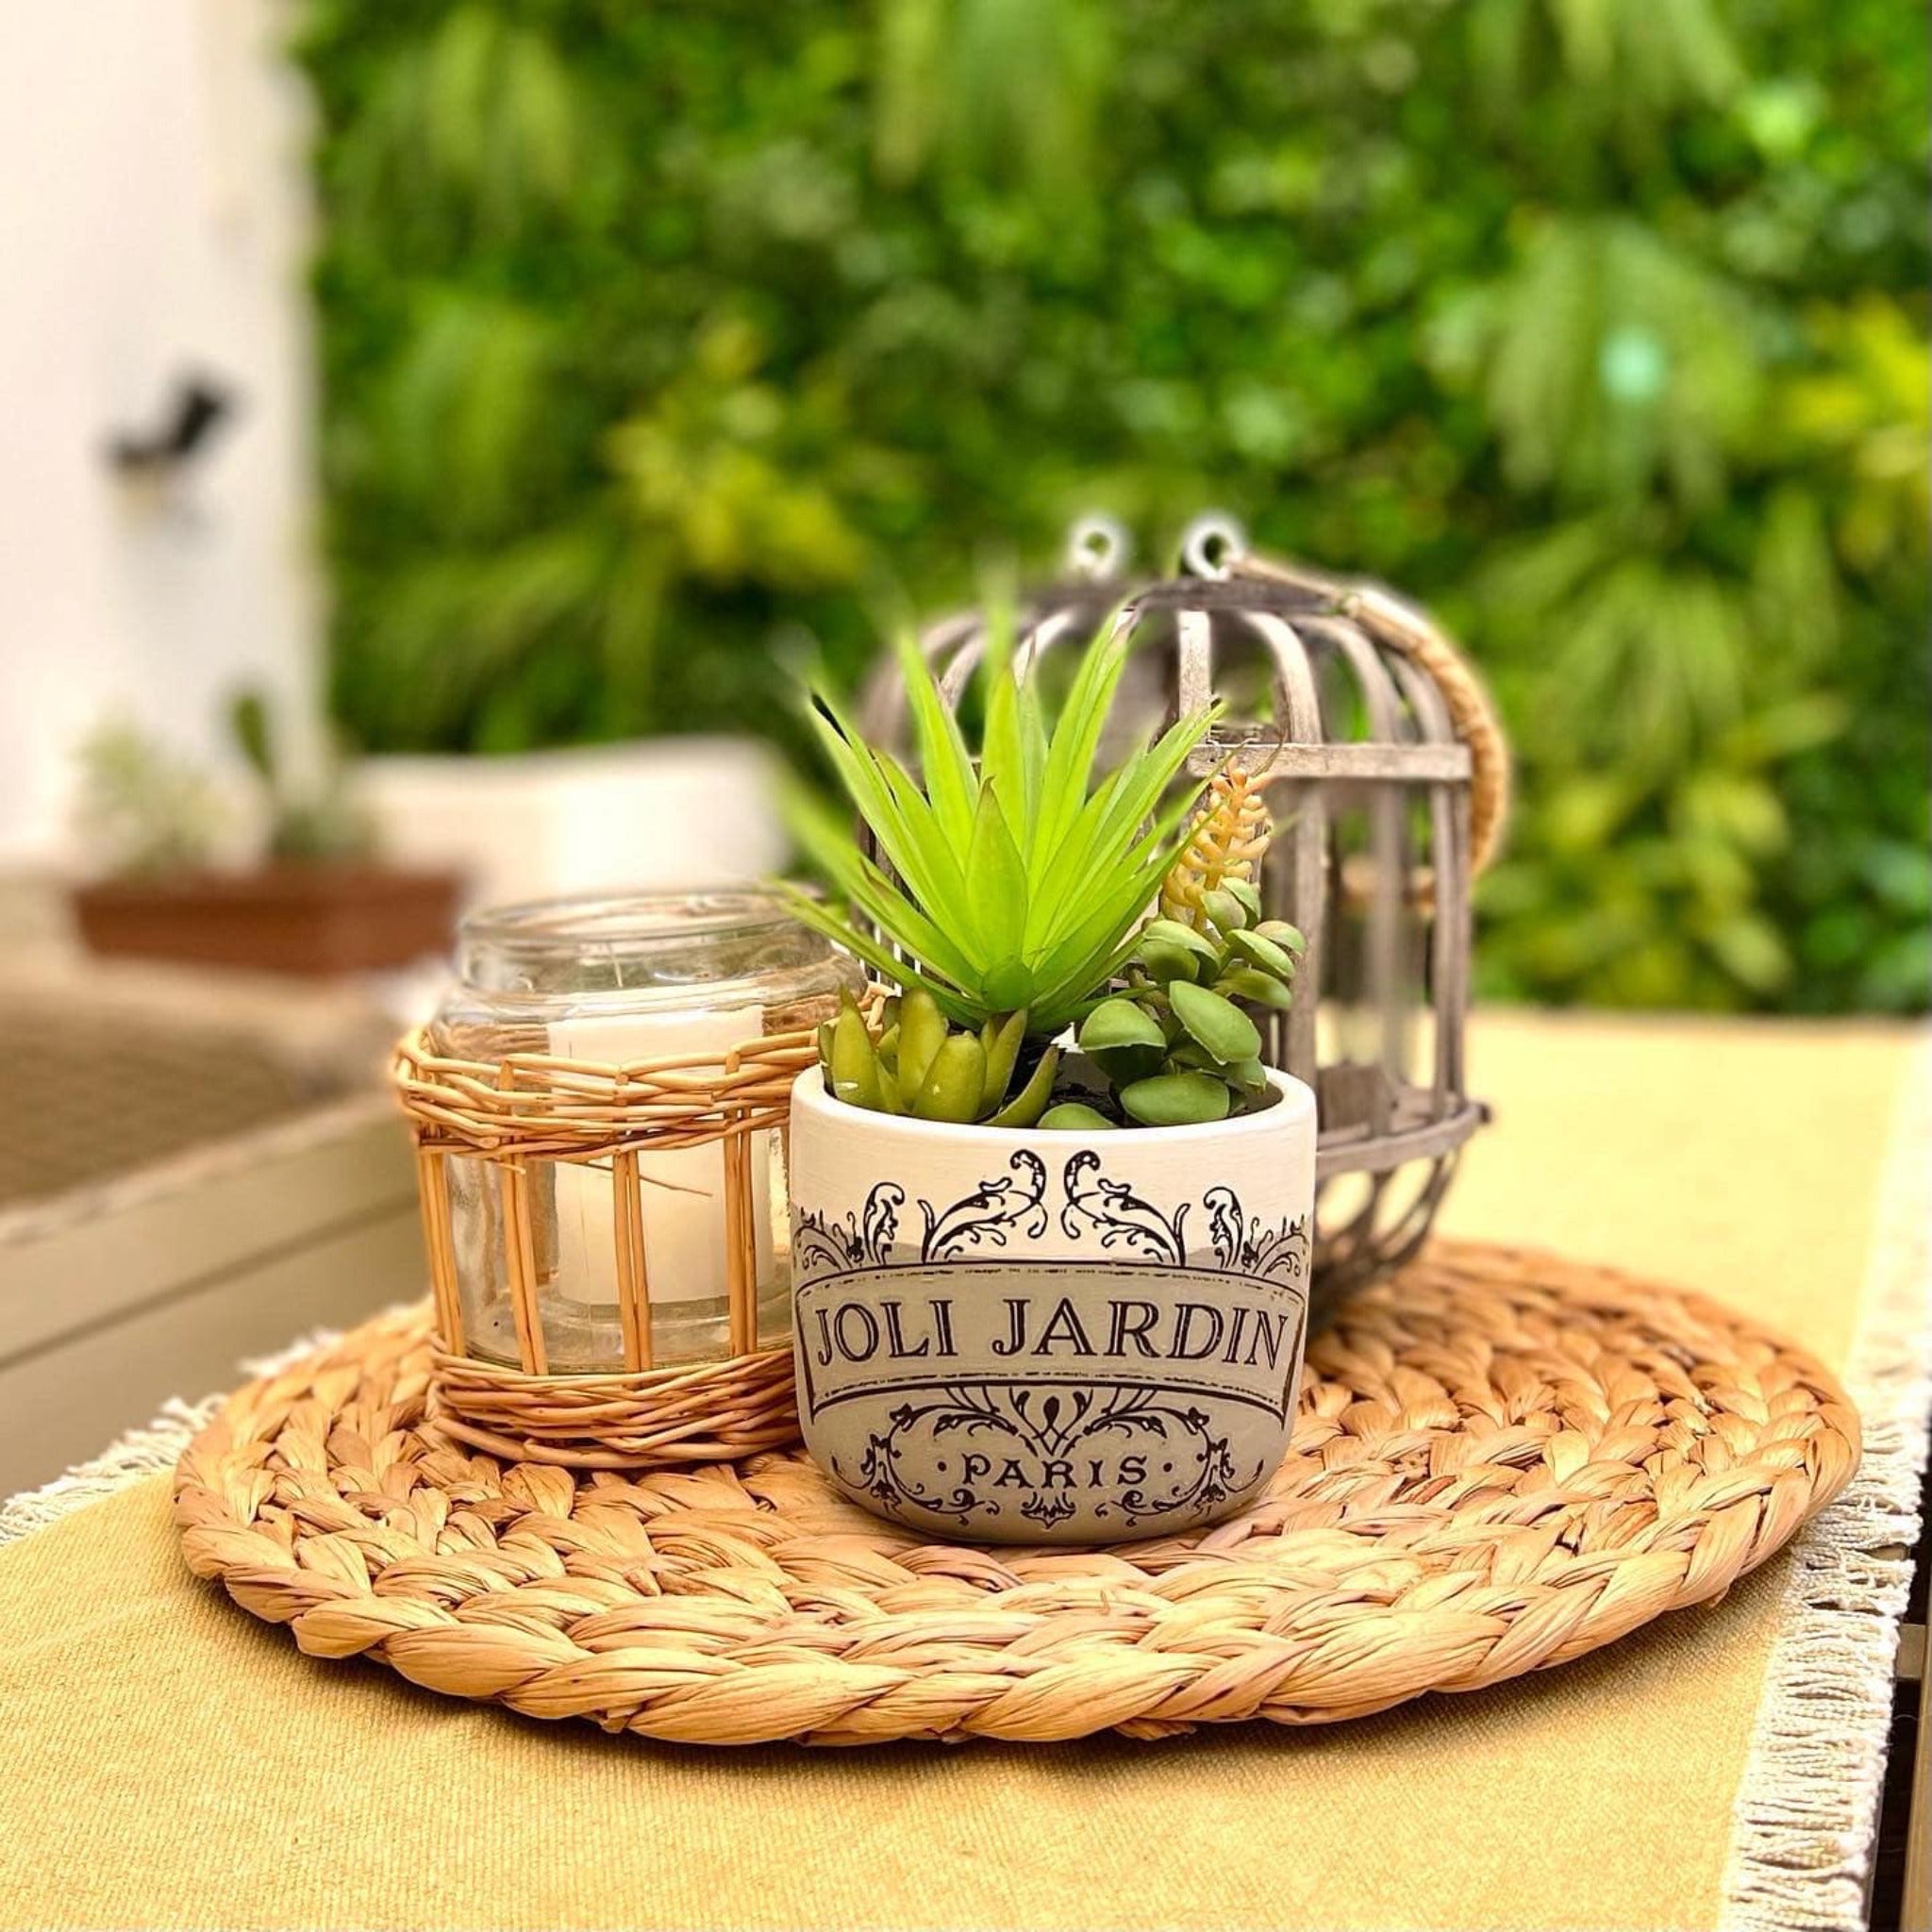 A small ceramic planter pot is painted light and dark beige and features ReDesign with Prima's Classic Vintage Labels transfer on it.